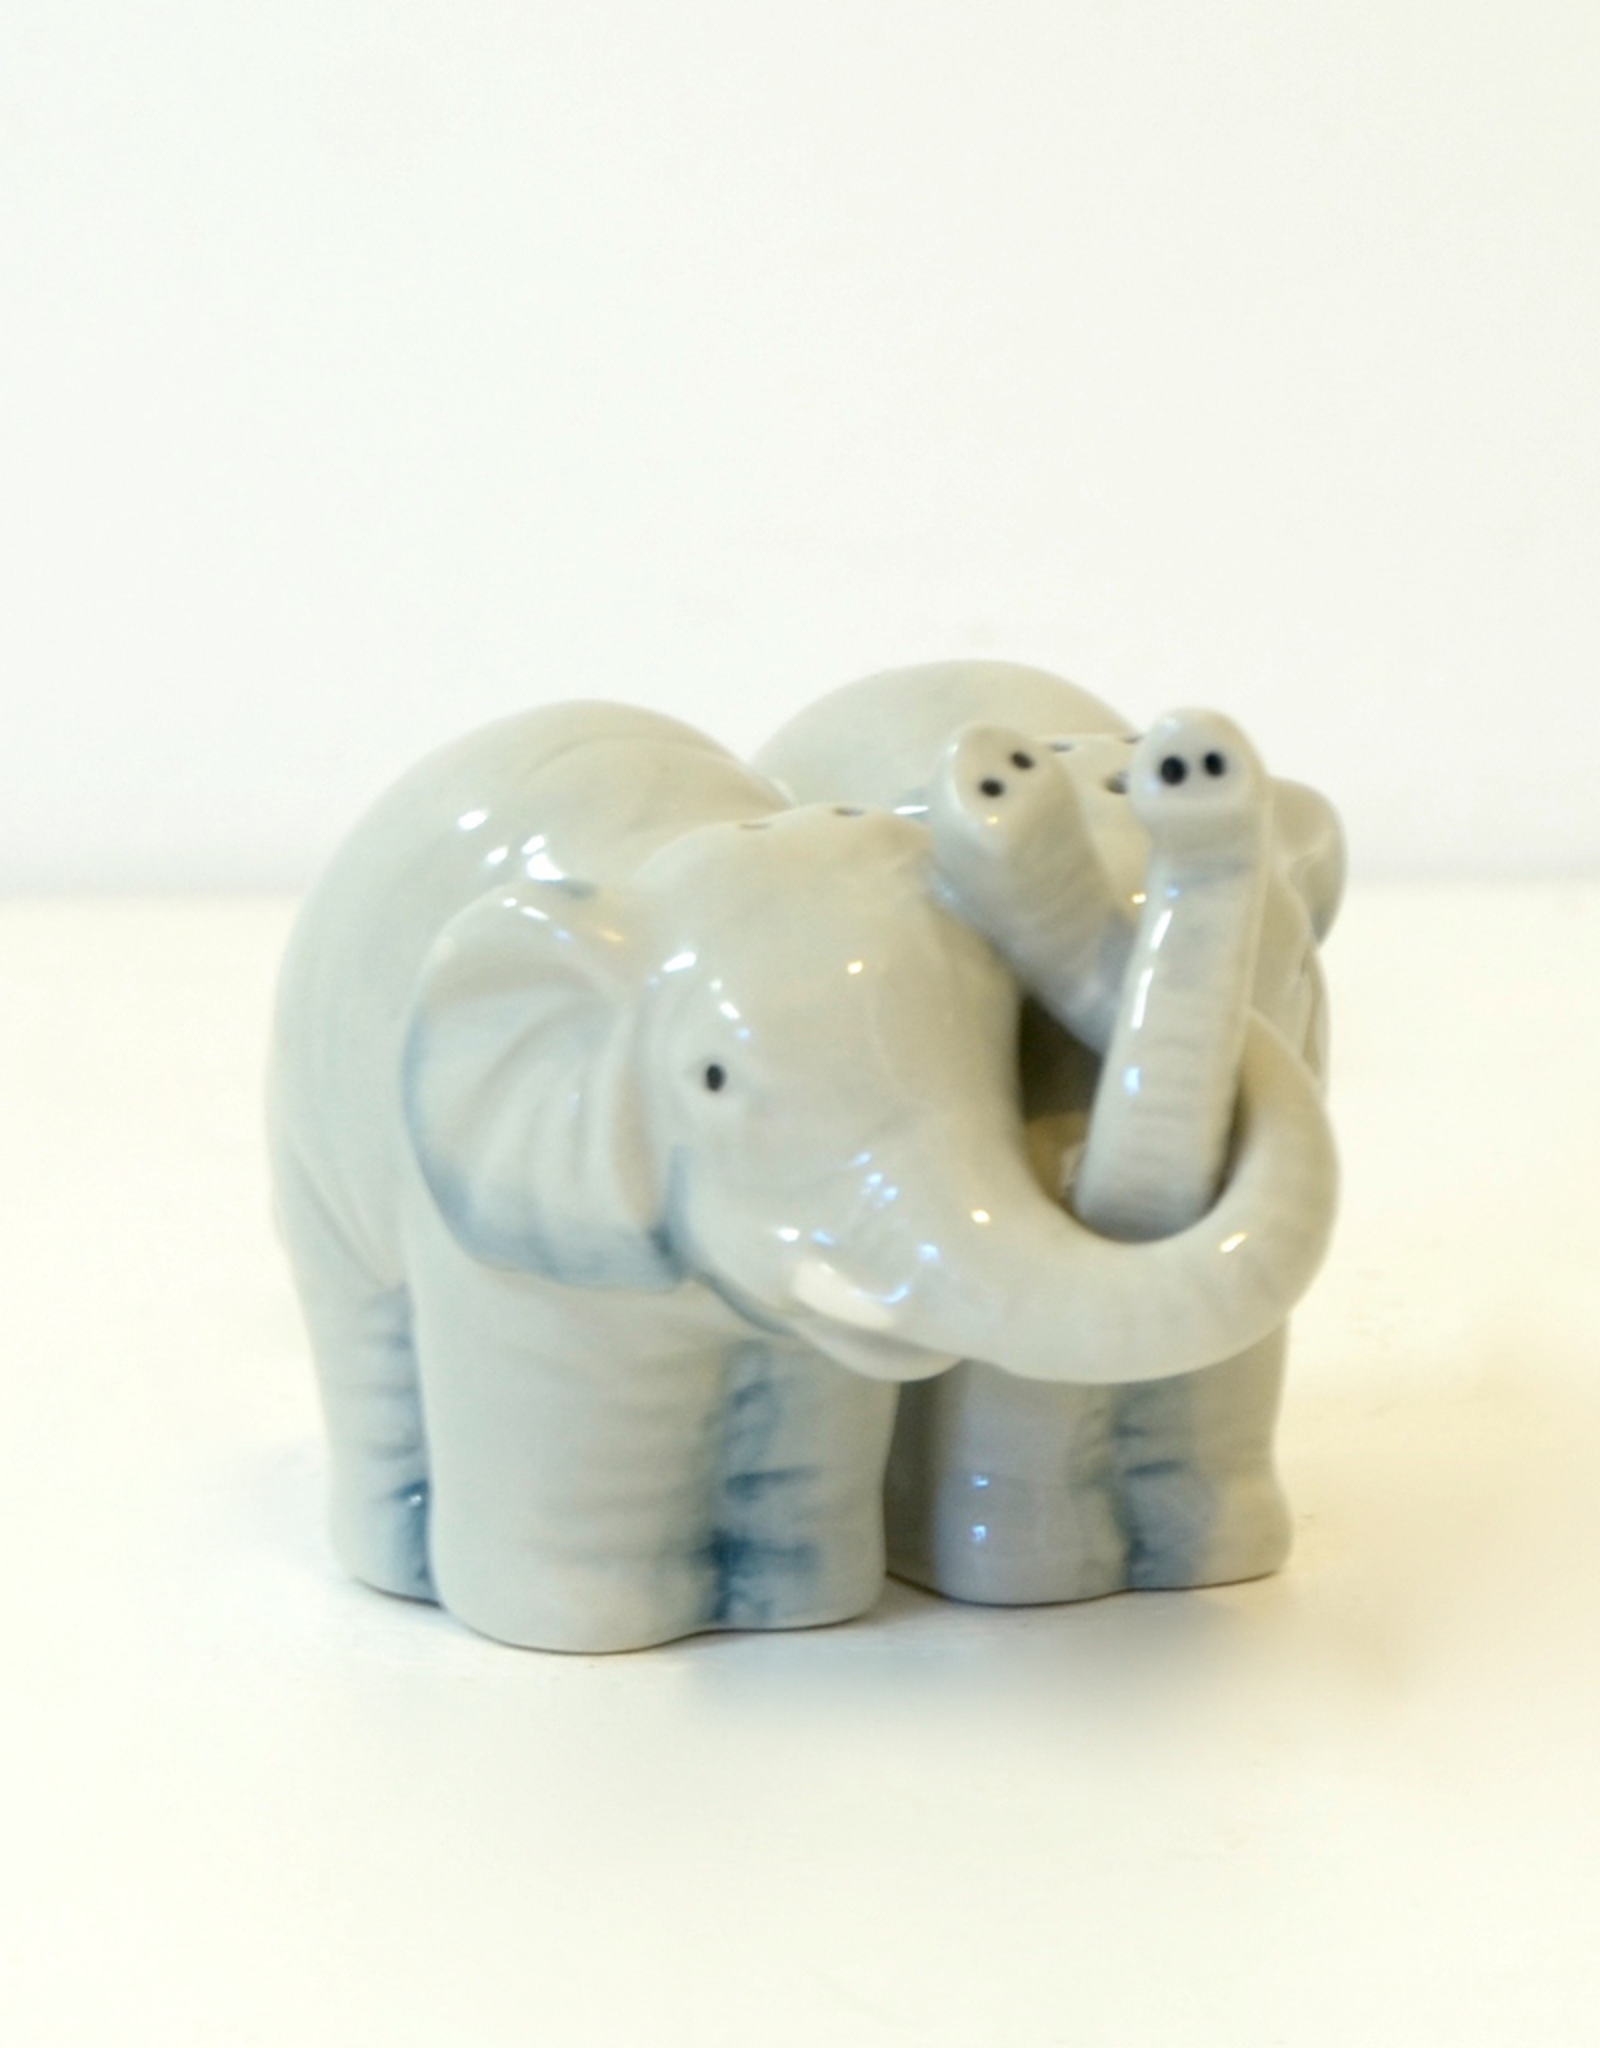 Pacific Trading 1 X Ceramic Magnetic Salt and Pepper Shaker Set - Elephants  They Kiss 8795